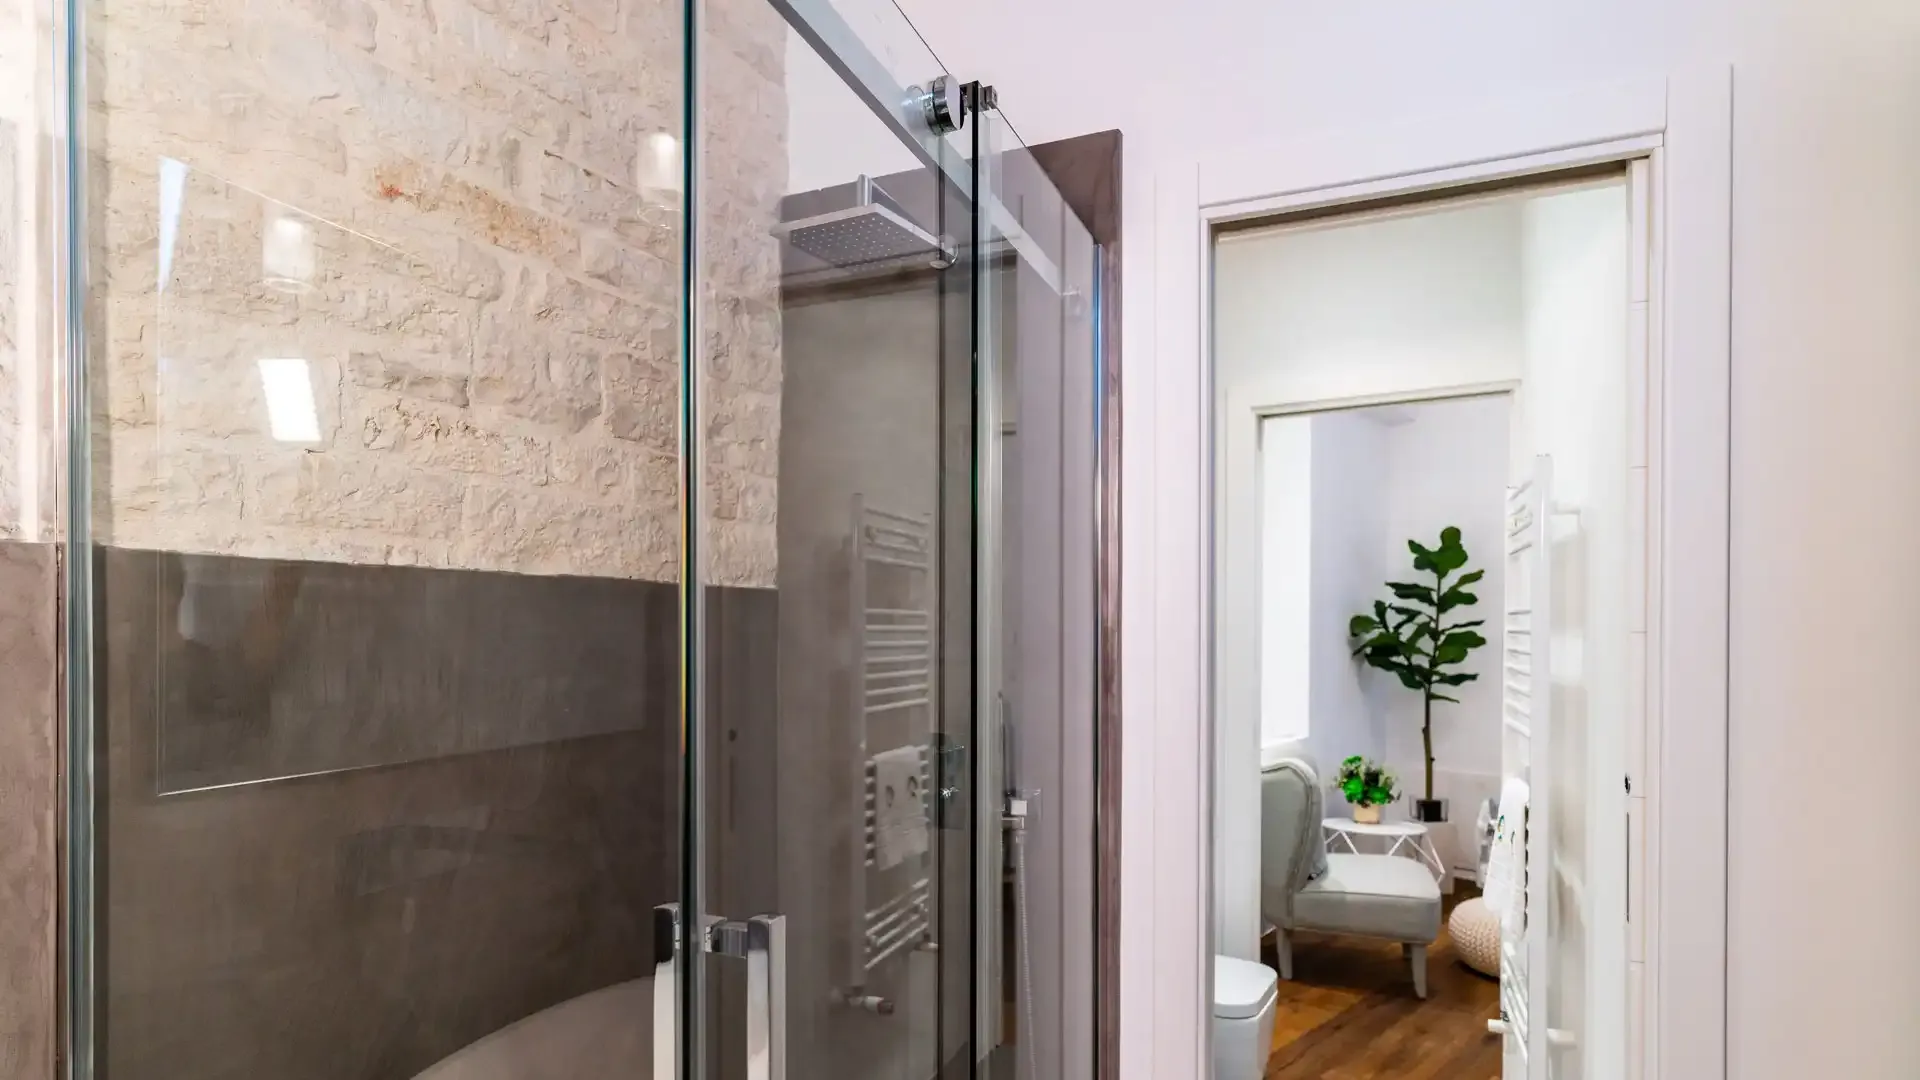 Modern bathroom with glass shower, stone walls, and view of an adjacent room.